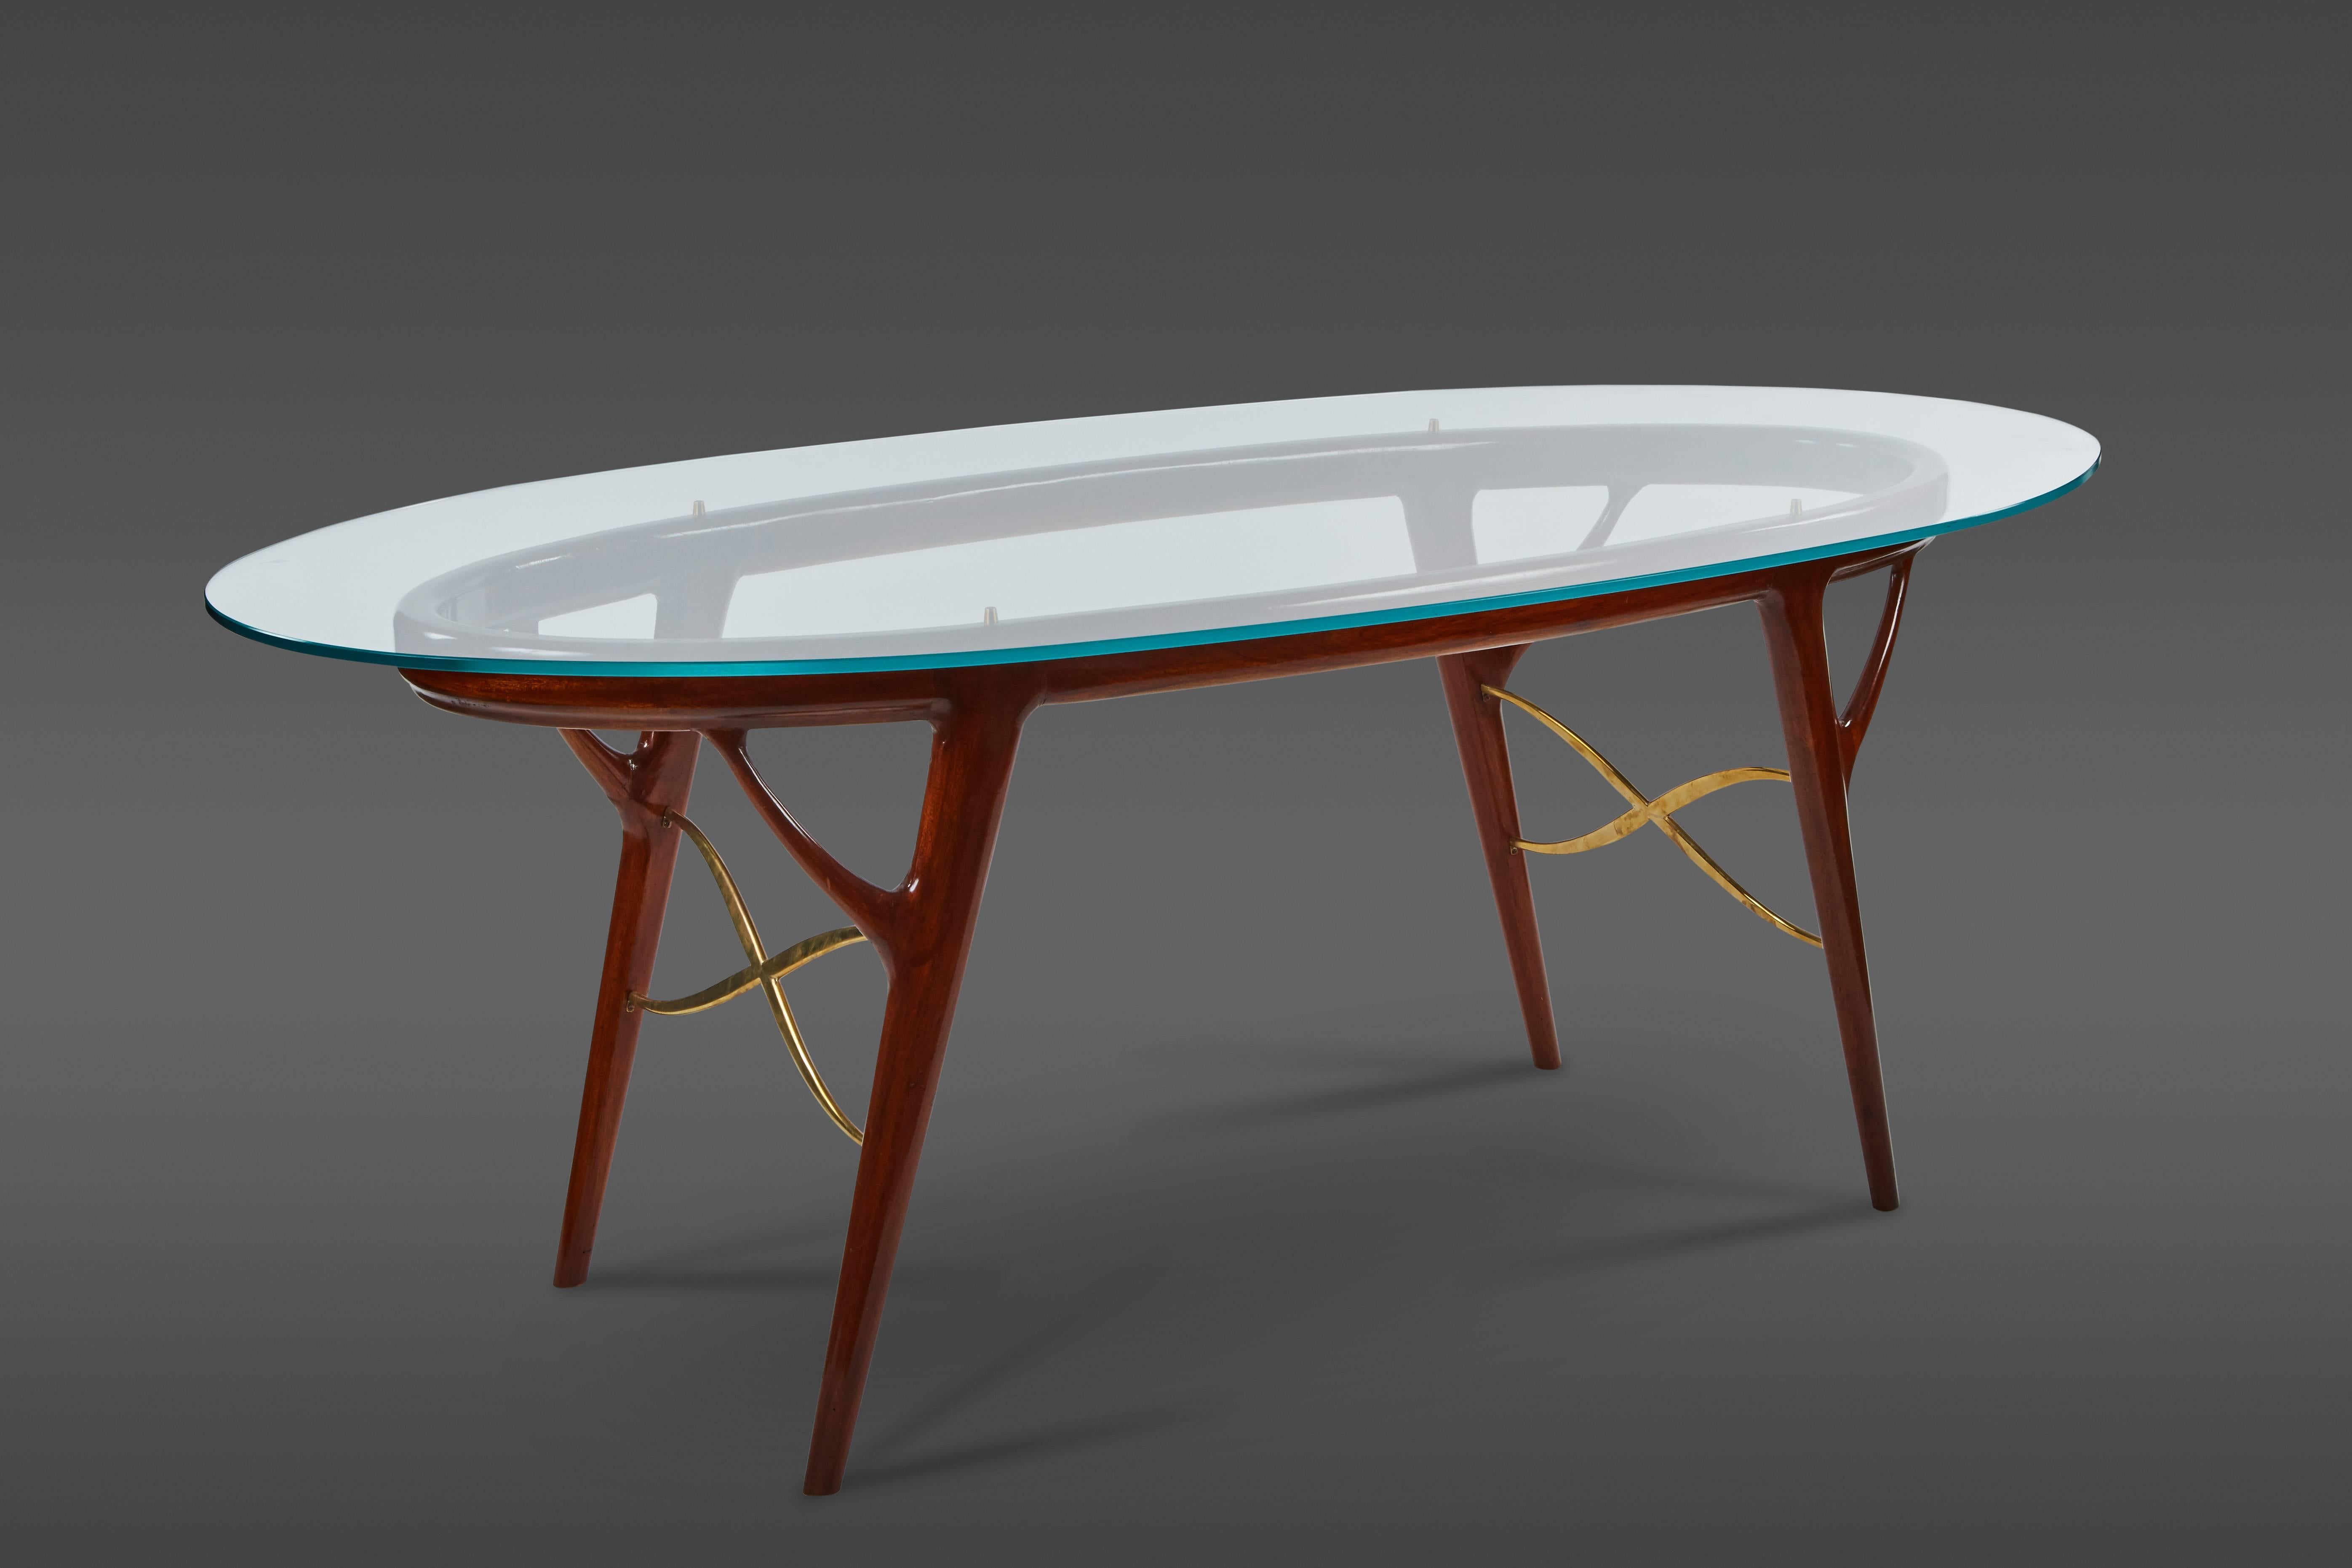 A striking oval table by Ico Parisi exhibiting a lacquered mahogany base, accentuated by graceful crossbars in brass. Its glass top rests on brass finials.